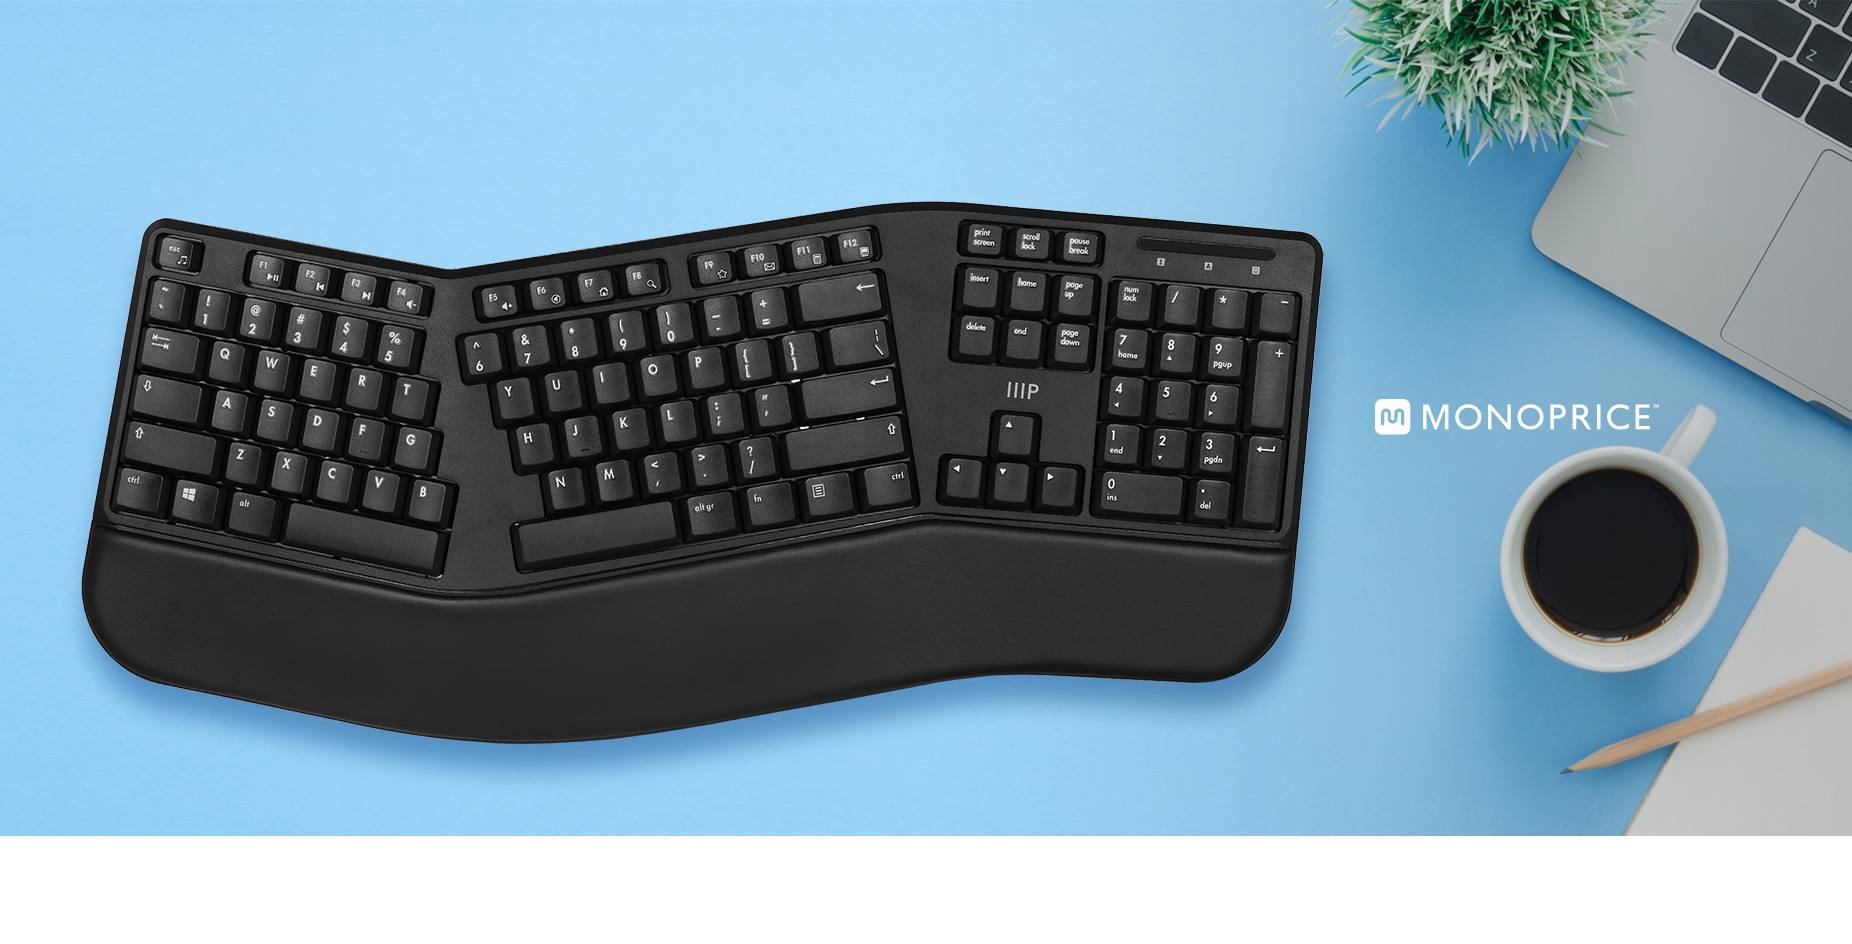 Say goodbye to wires: Freedom of wireless keyboard and mouse